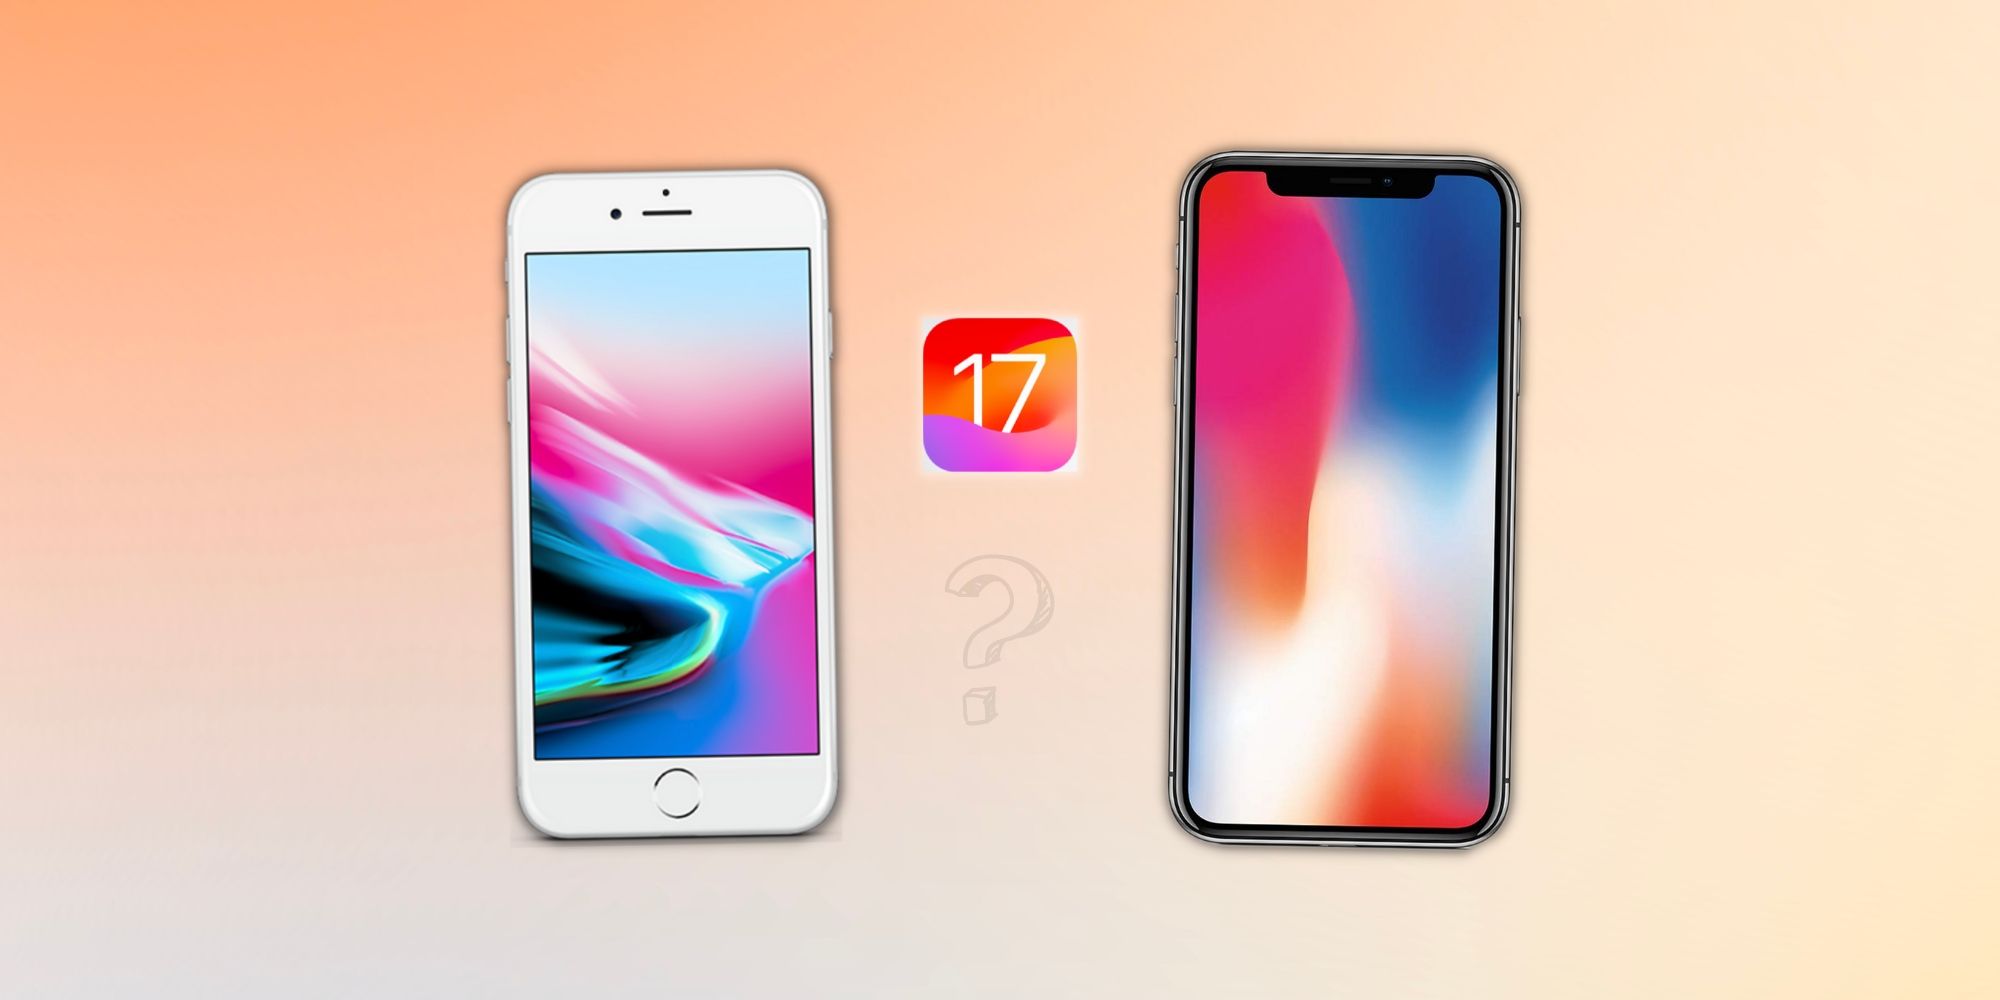 Will The iPhone 8 & iPhone X Get iOS 17? Here Are The Supported Devices